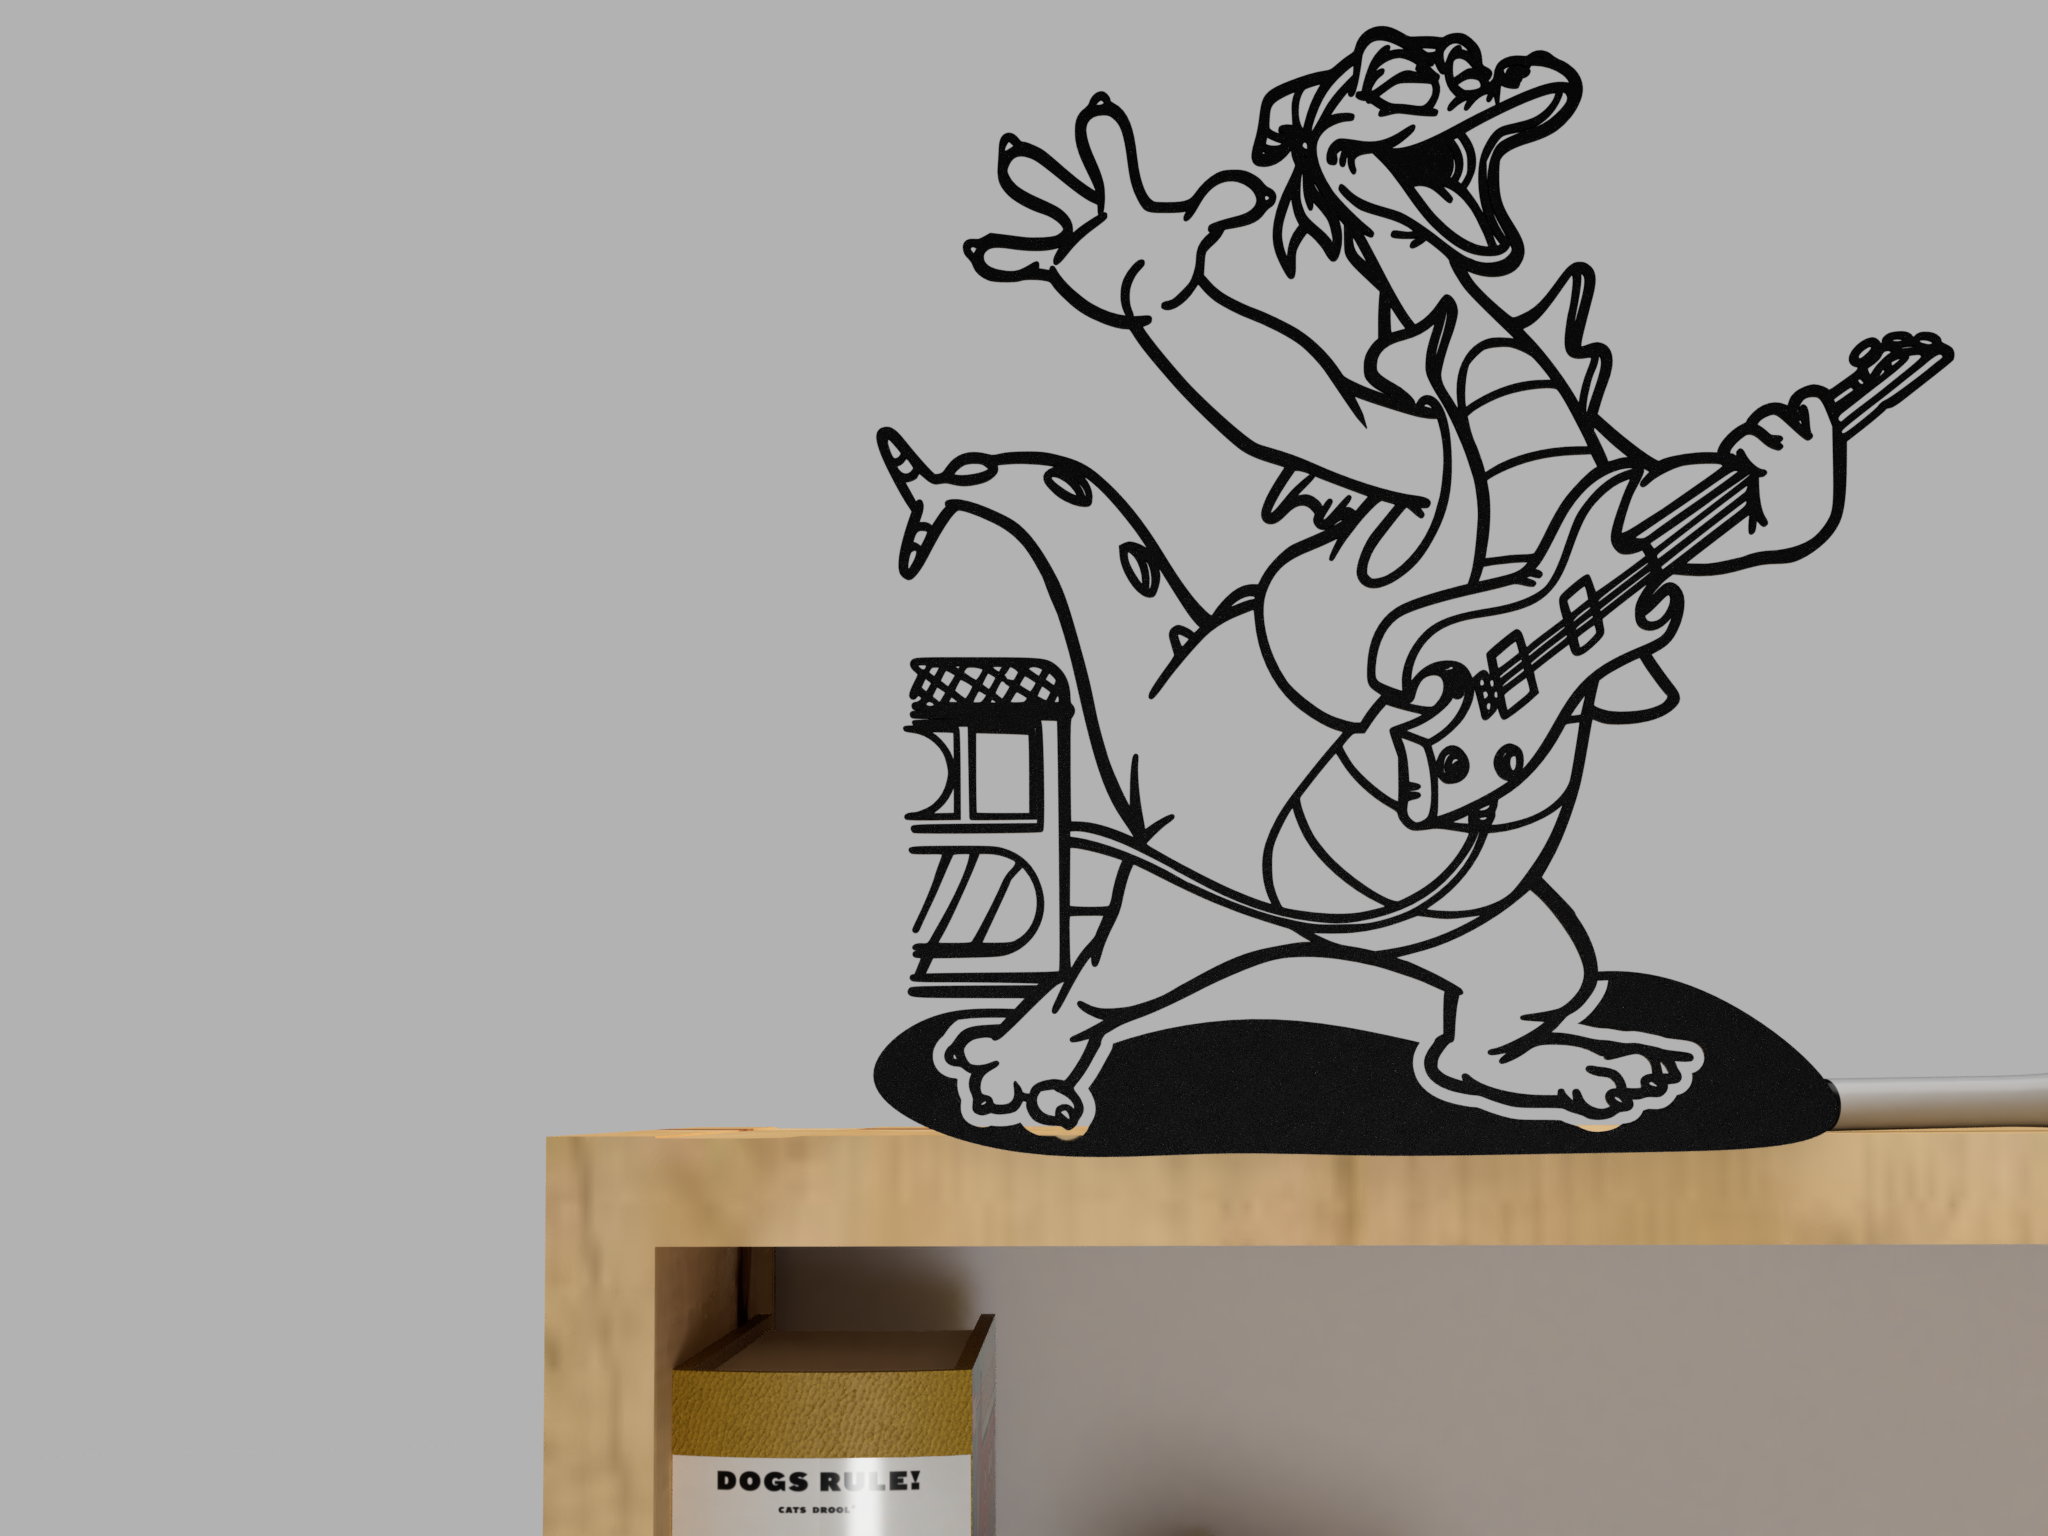 Figment jamming on a guitar